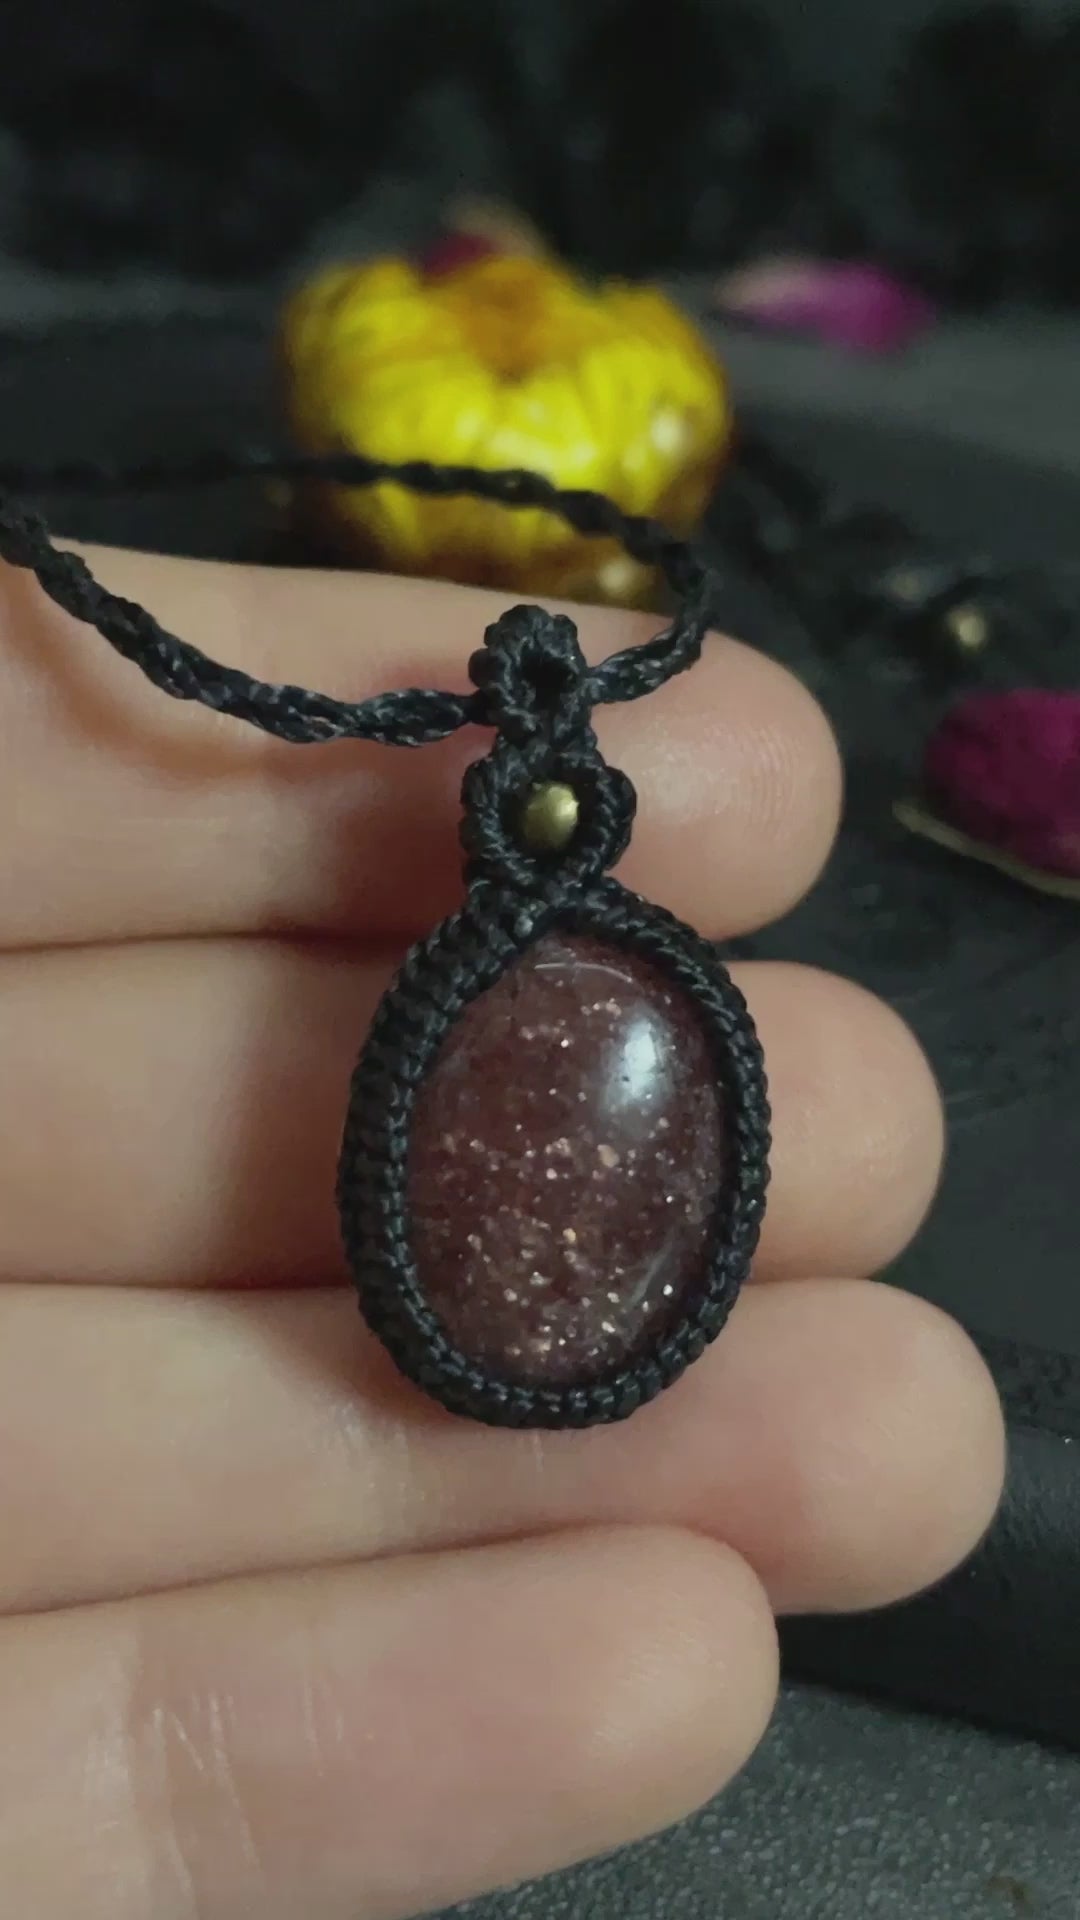 Pictured is a strawberry quartz cabochon wrapped in macrame thread. A gothic book and flowers are nearby.